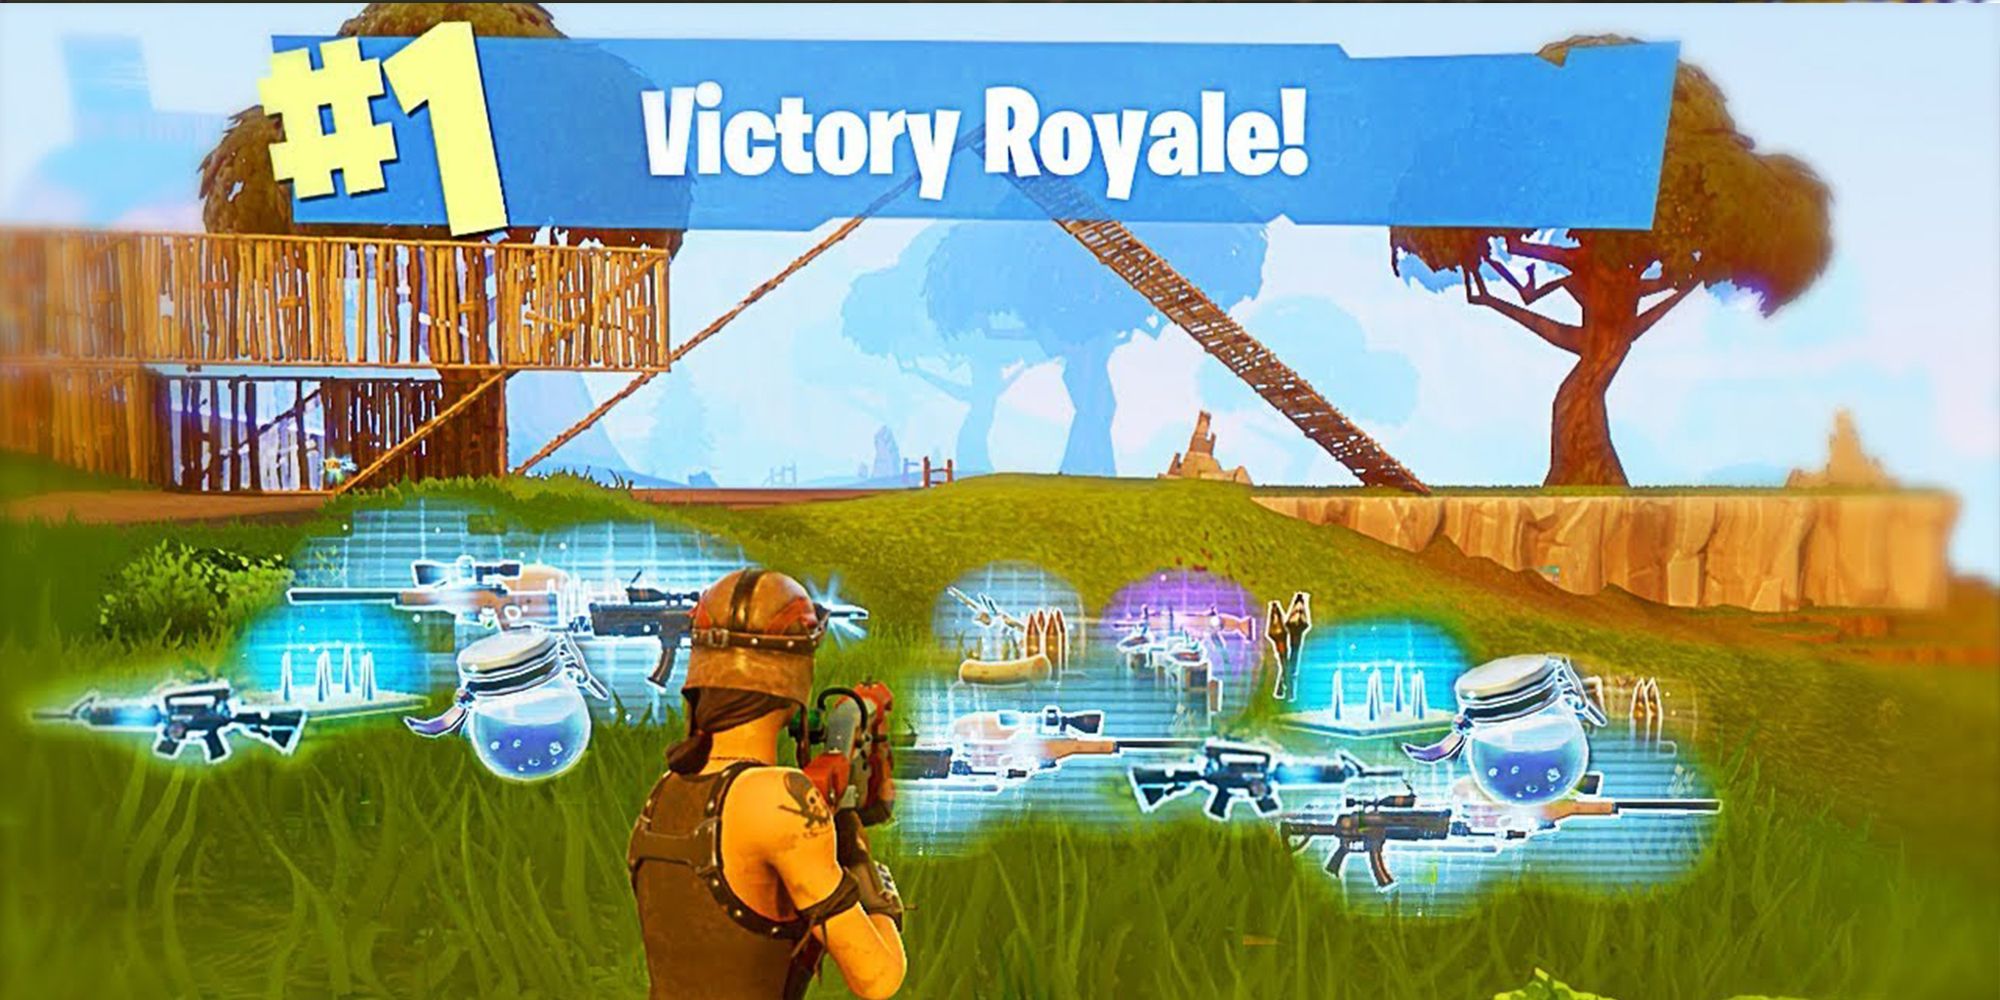 copter royale victory